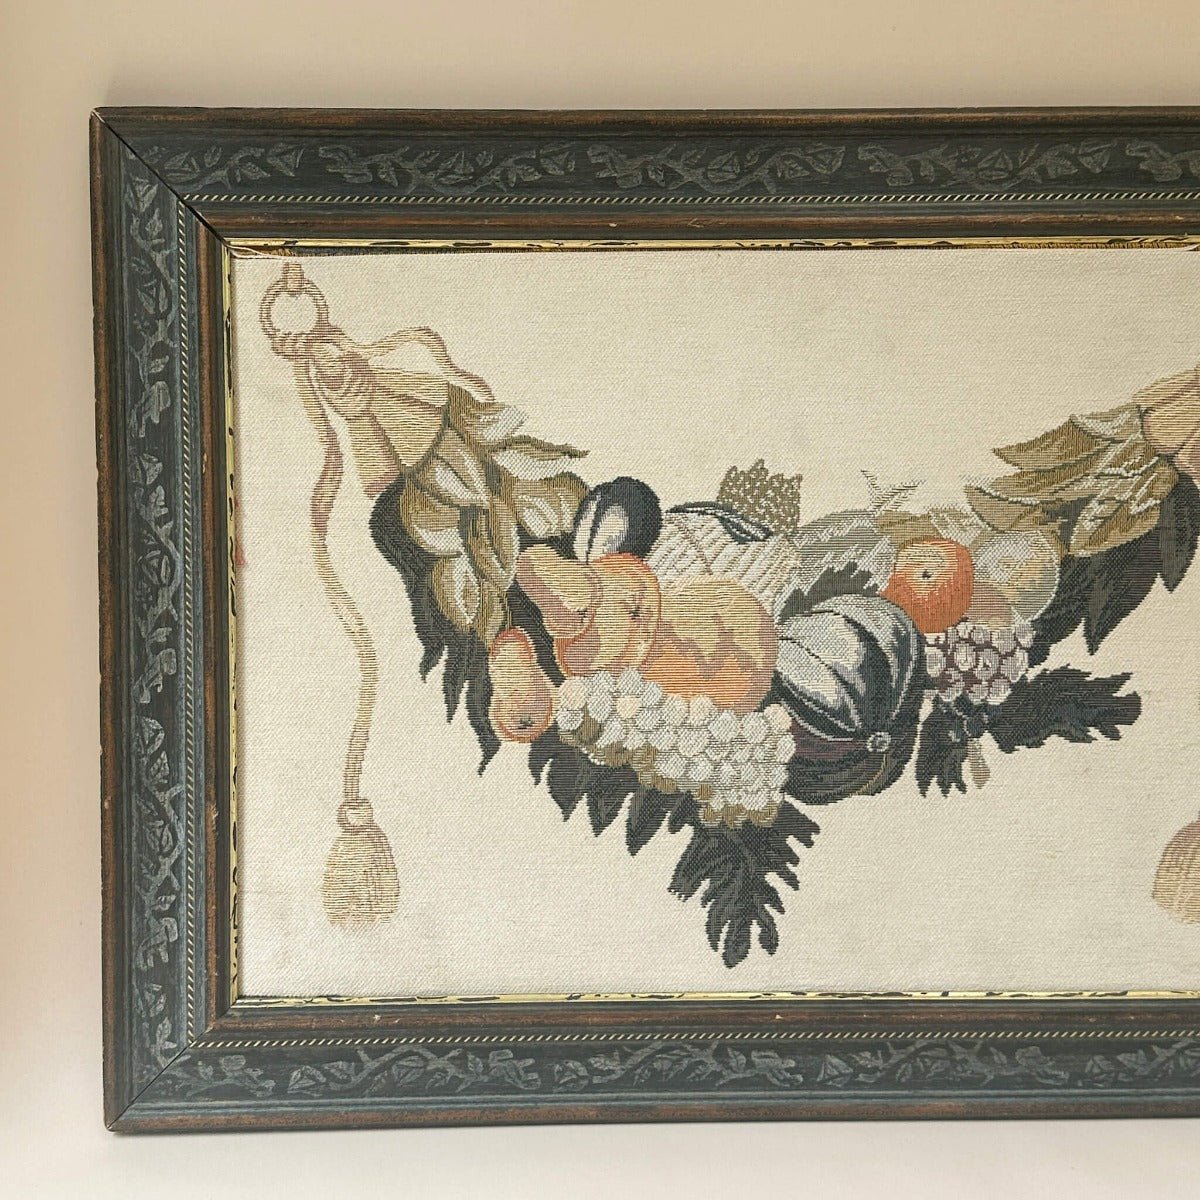 Framed Needlepoint Wall Art - SpaceHavenHome